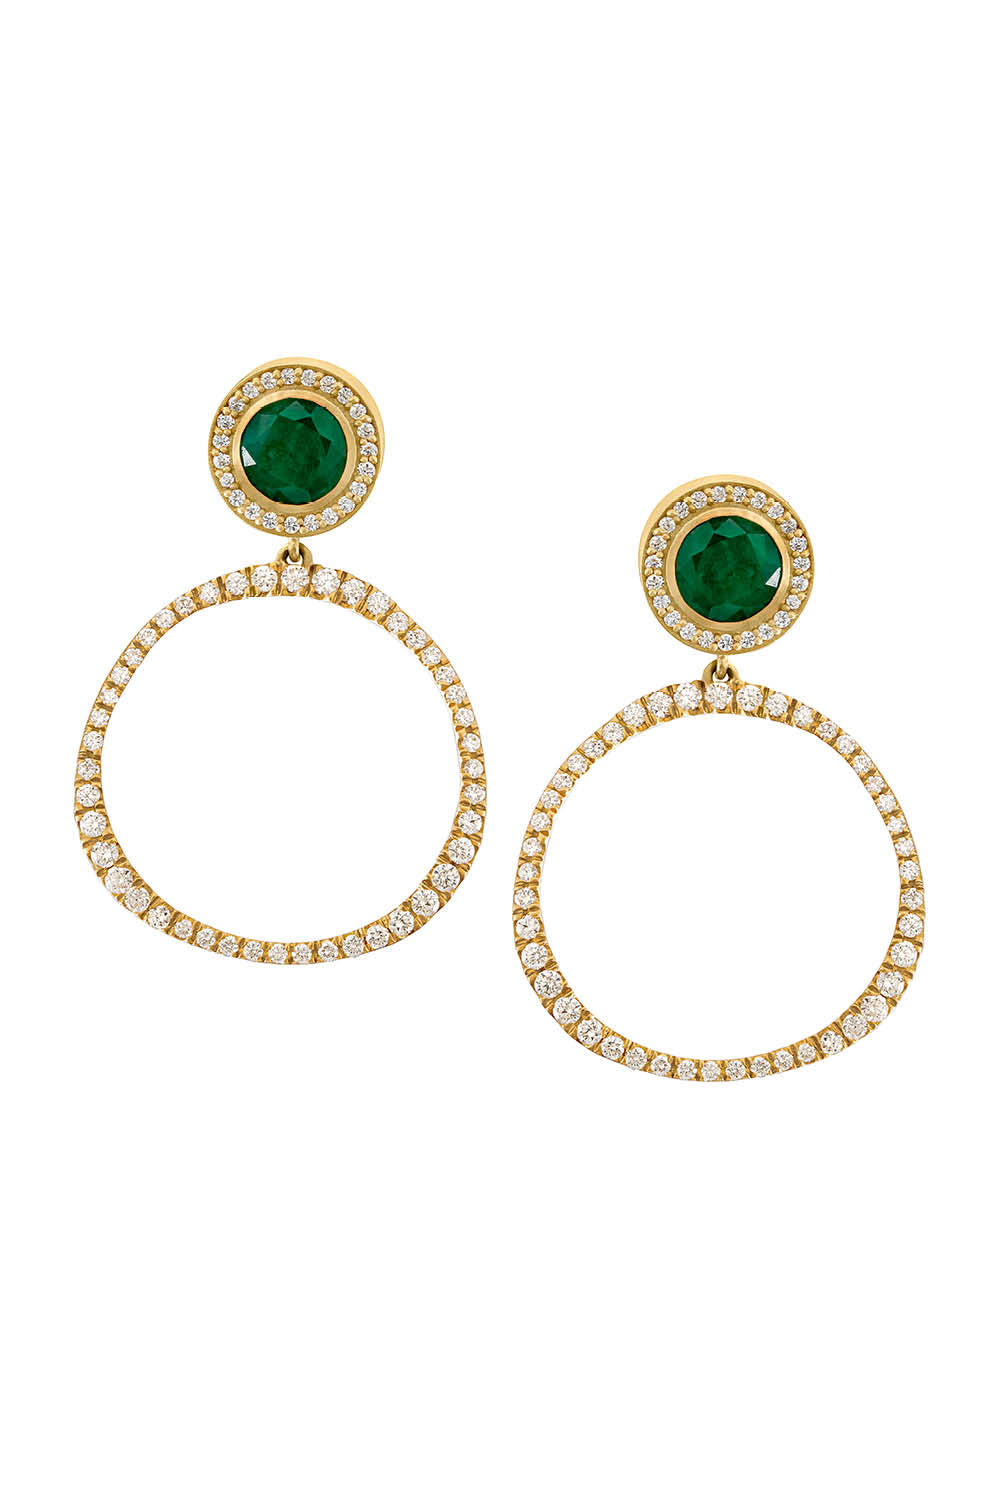 Sandy Leong Petite Pave Origin Hoops with Emerald and Diamond Studs